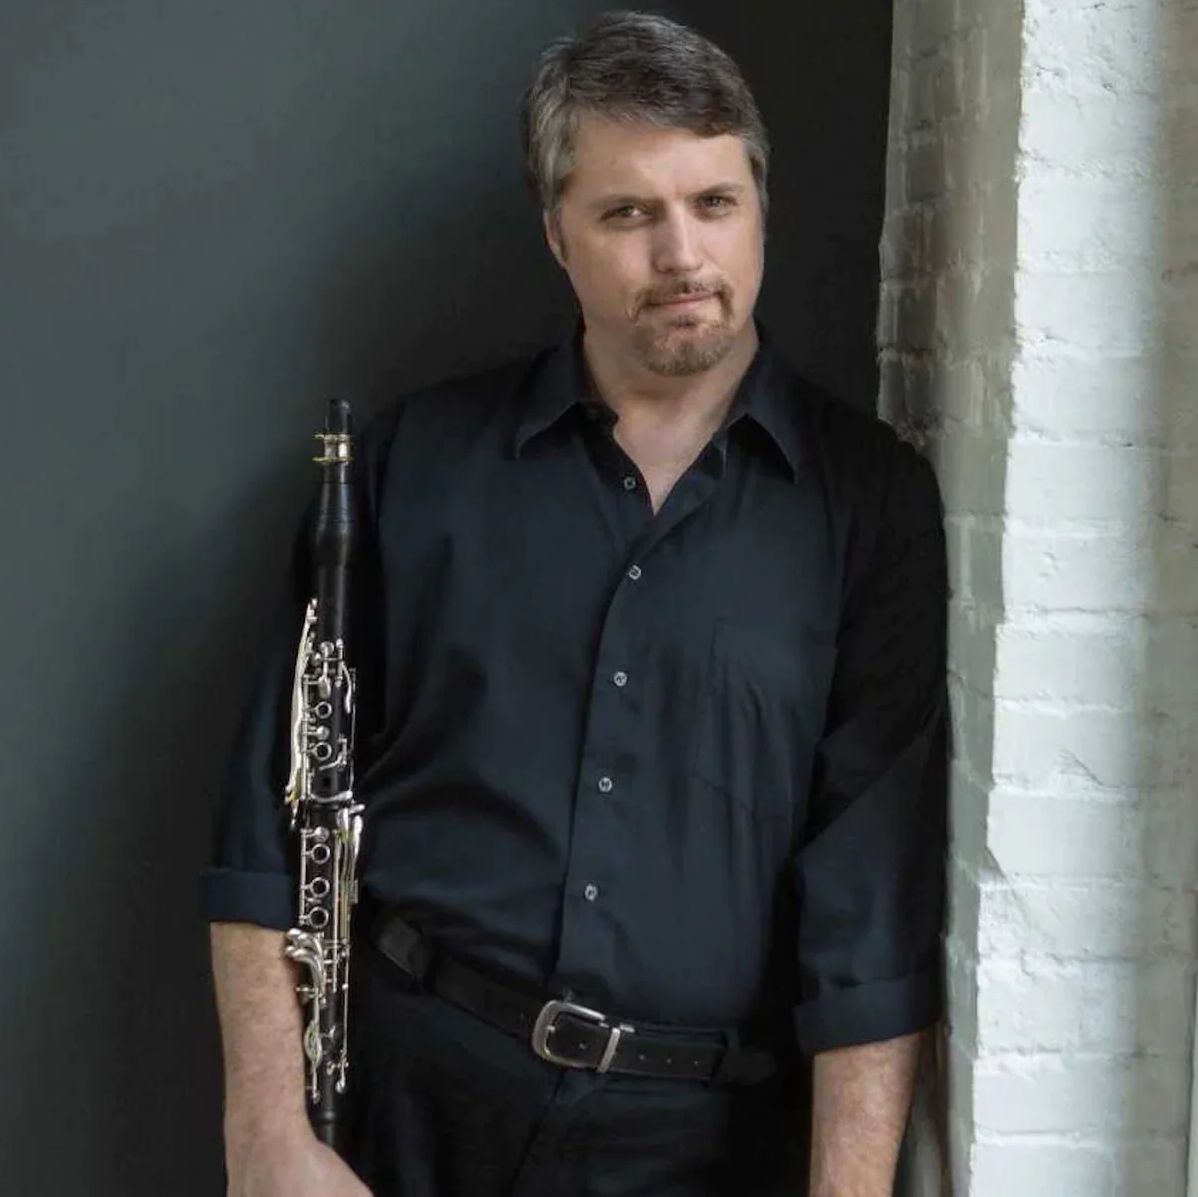 Sean Osborn leaning his shoulder against a brick wall, holding a clarinet in the opposite arm, sporting short graying hair and a trim goatee